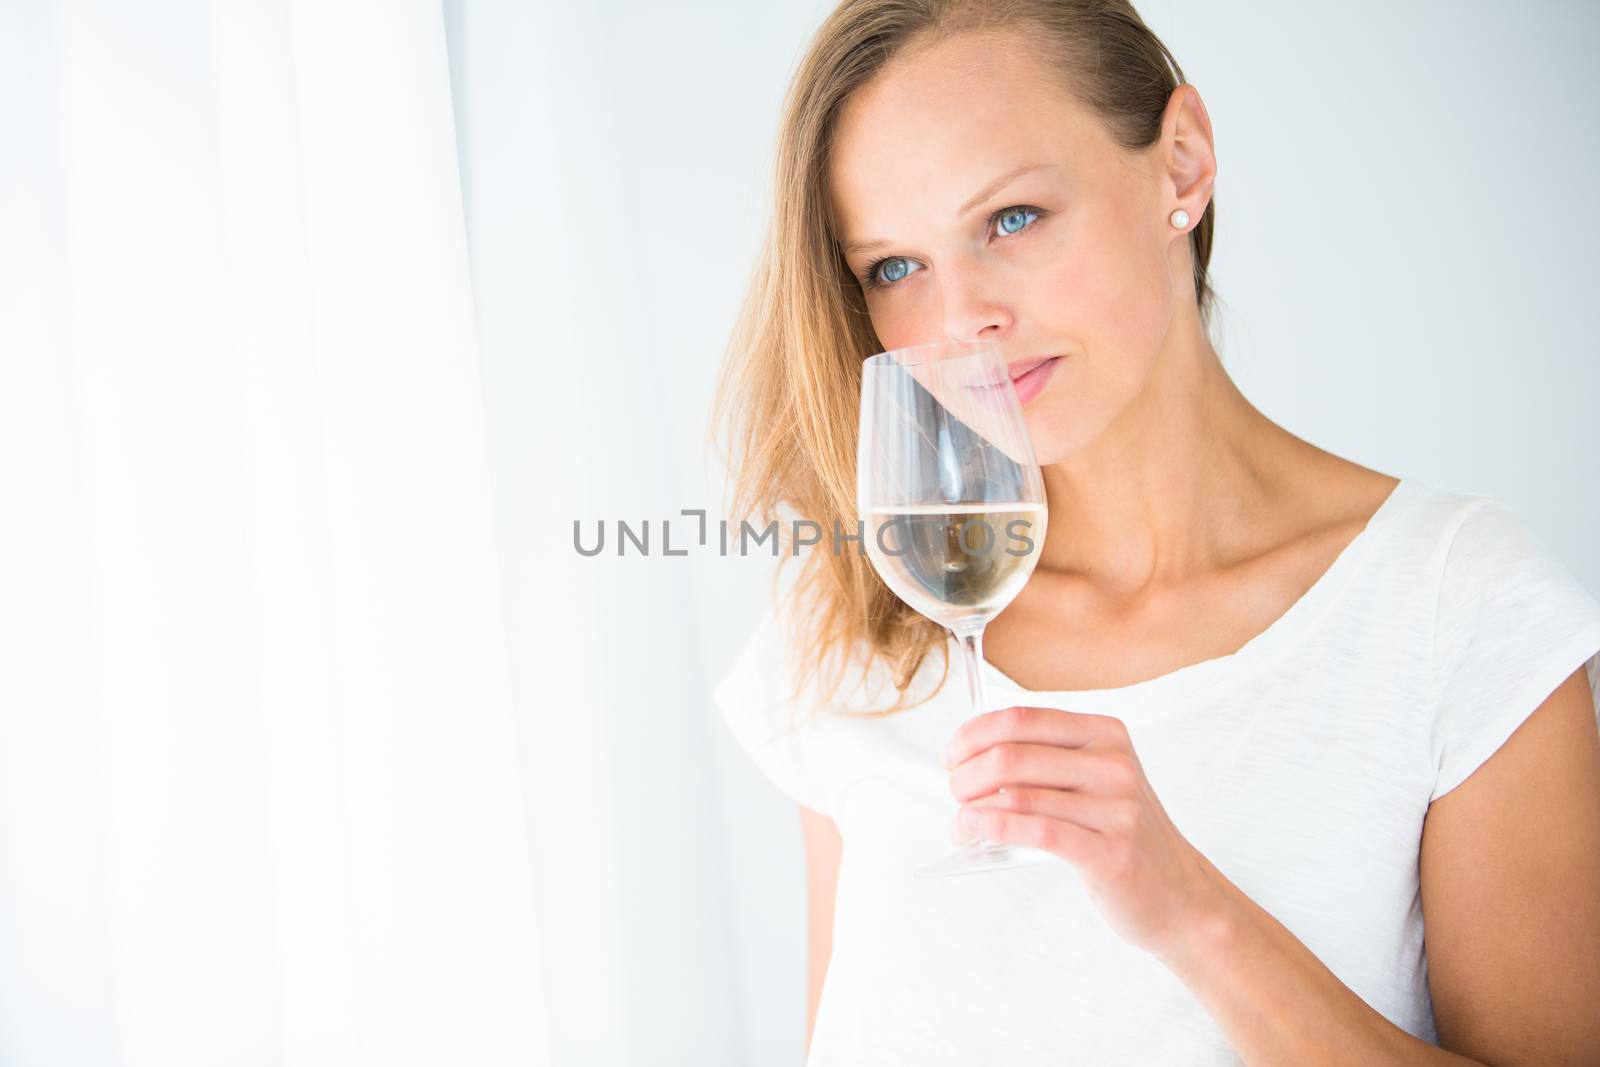 Gorgeous young woman with a glass of wine, smelling the lovely drink, savouring every sip (shallow DOF; color toned image)